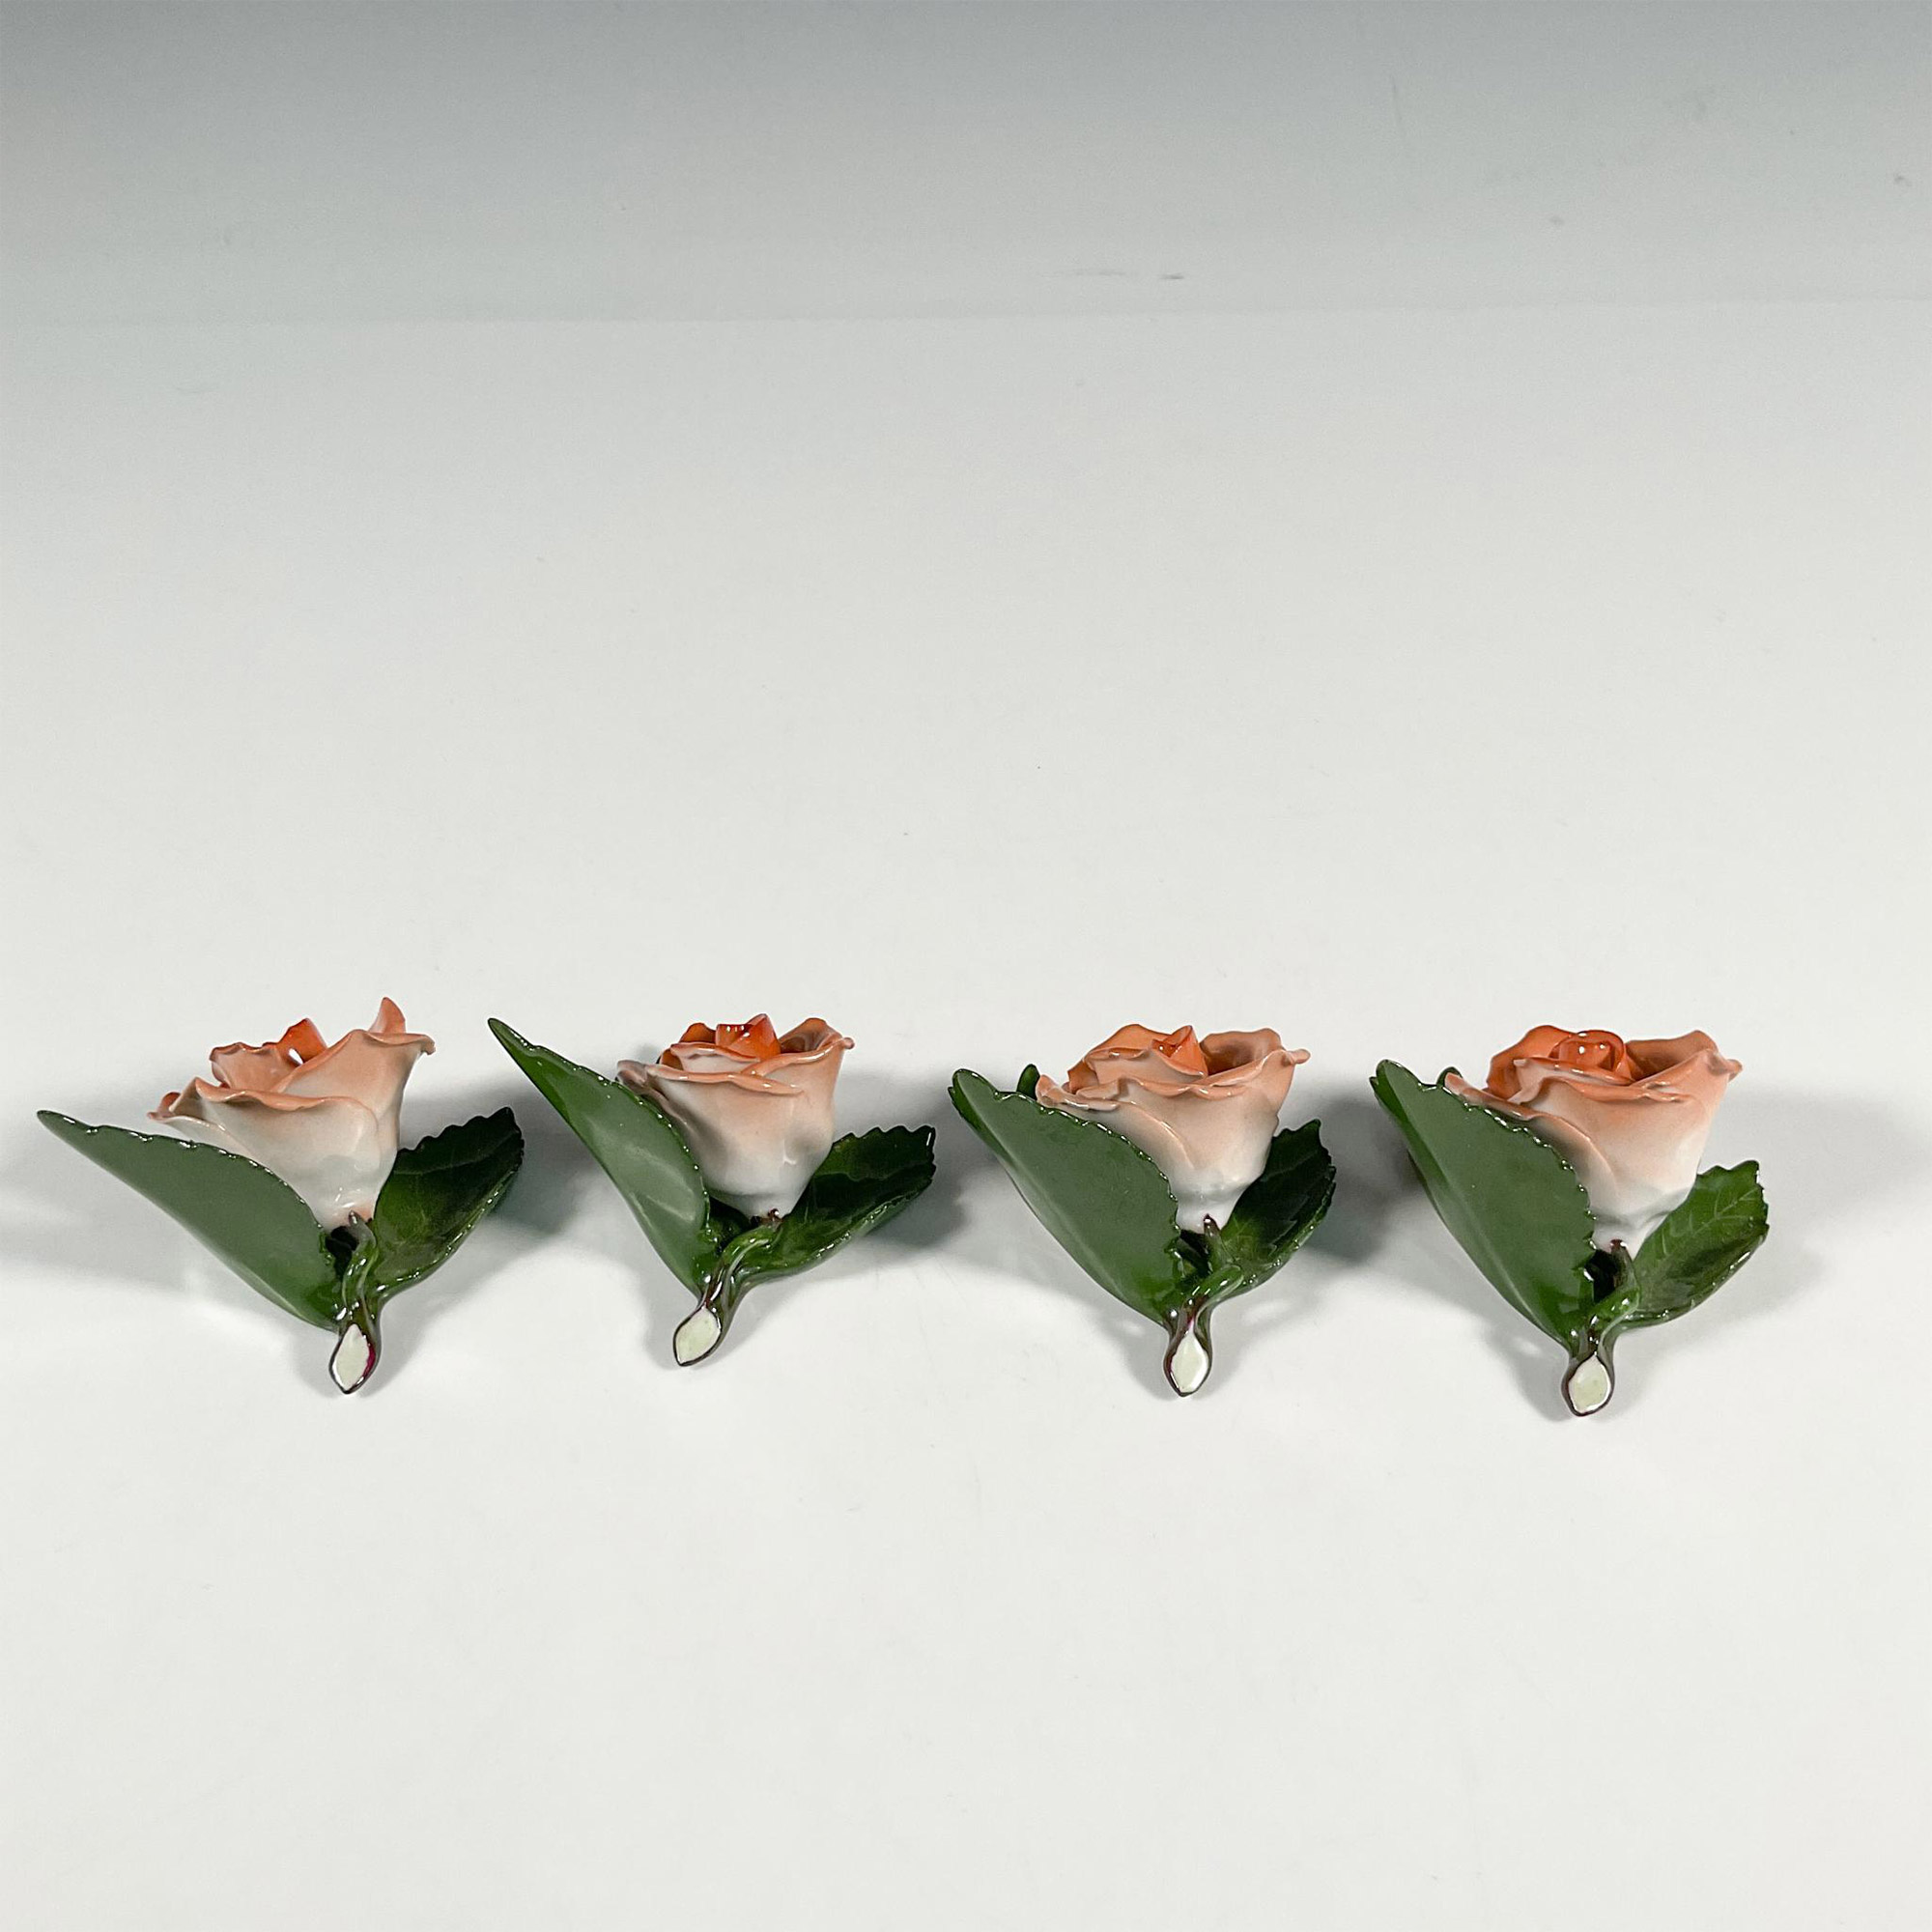 4pc Herend Porcelain Rose Figurines - Image 3 of 4